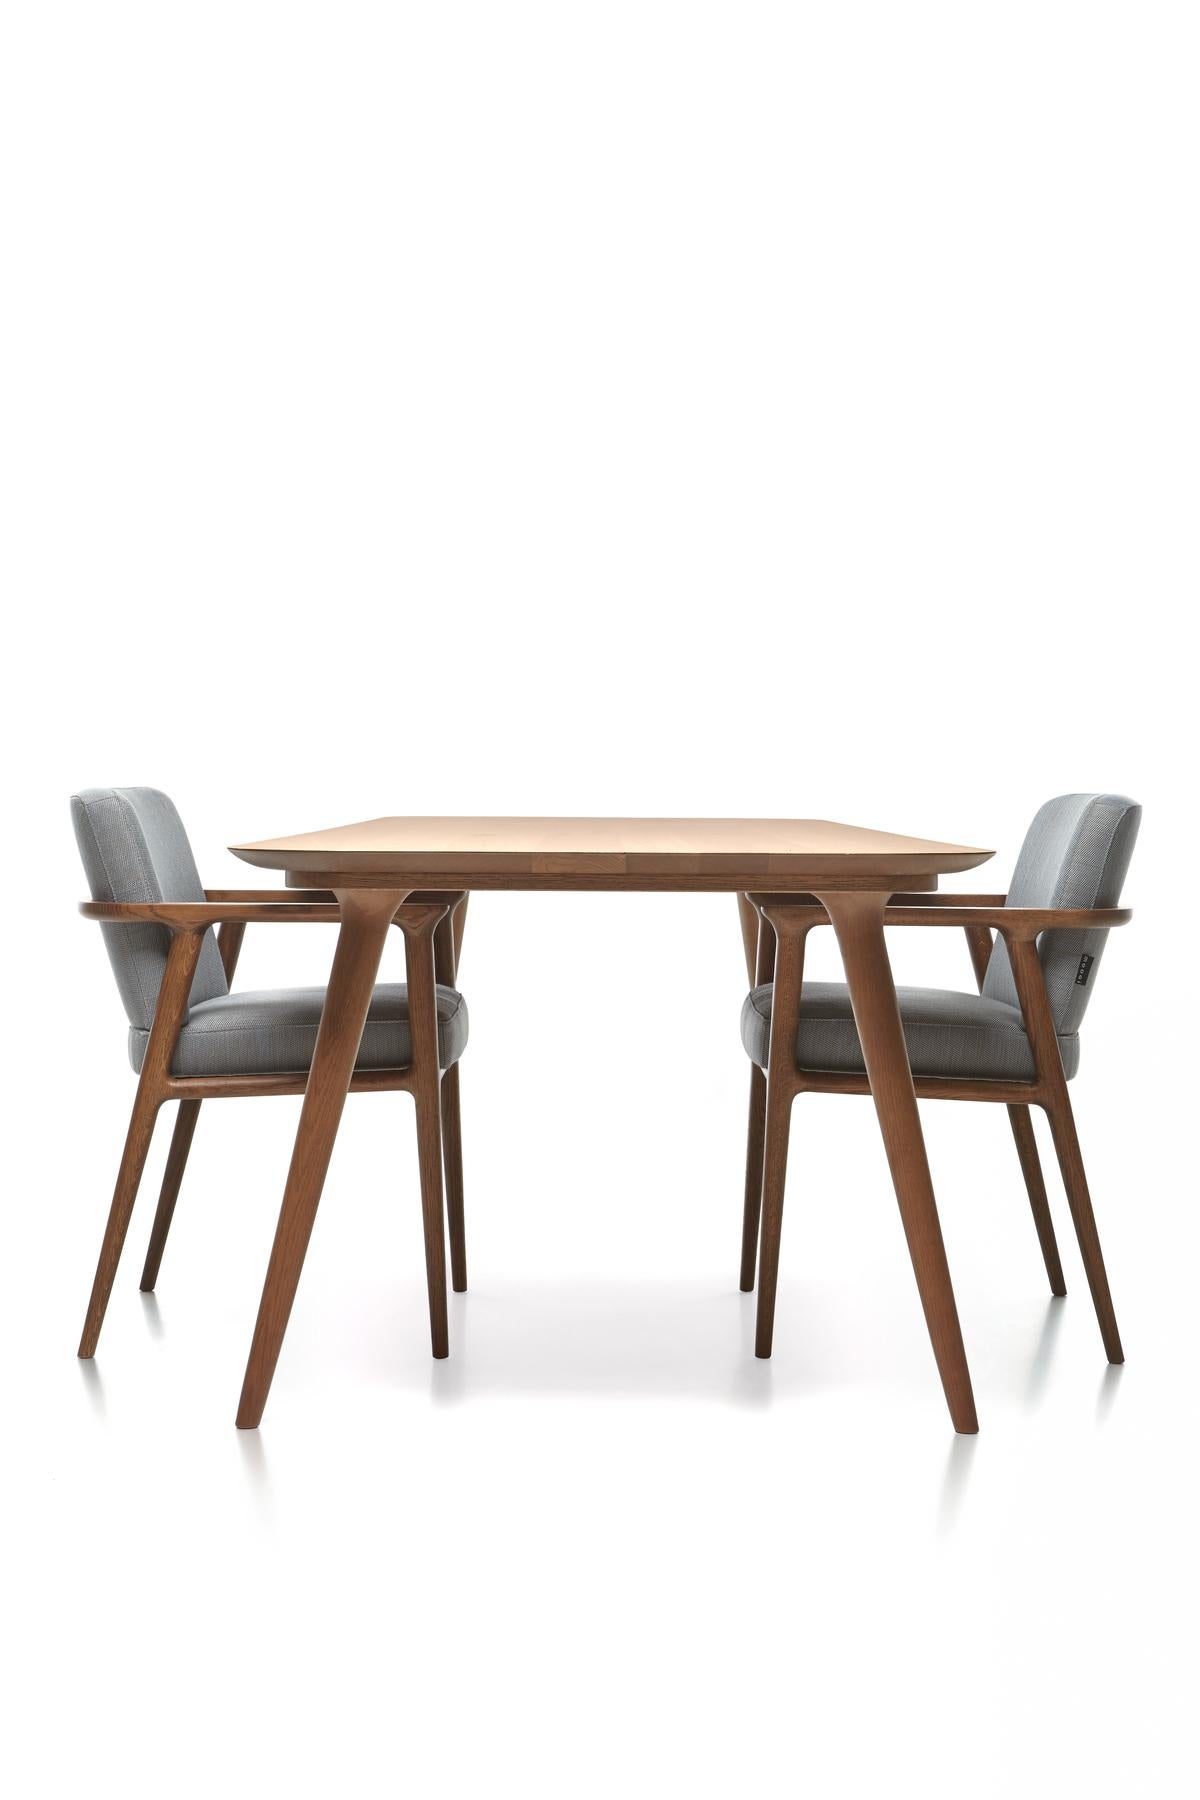 Modern Moooi Zio Dining Chair in Divina MD, 733 Upholstery with Oak Natural Oil Frame For Sale